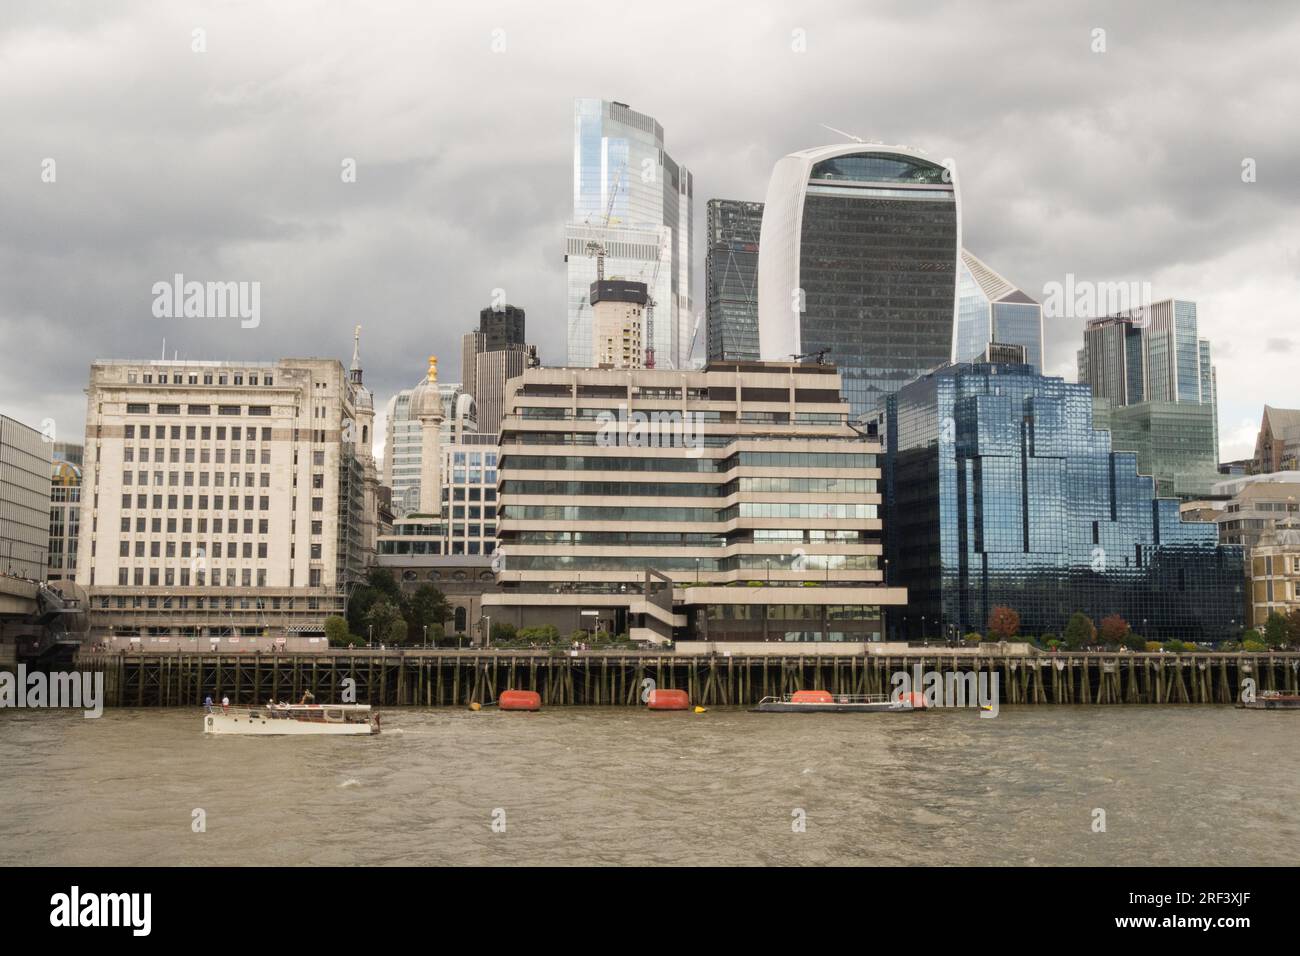 The City of London skyline as seen from the south side of the River Thames, London, England, U.K. Stock Photo